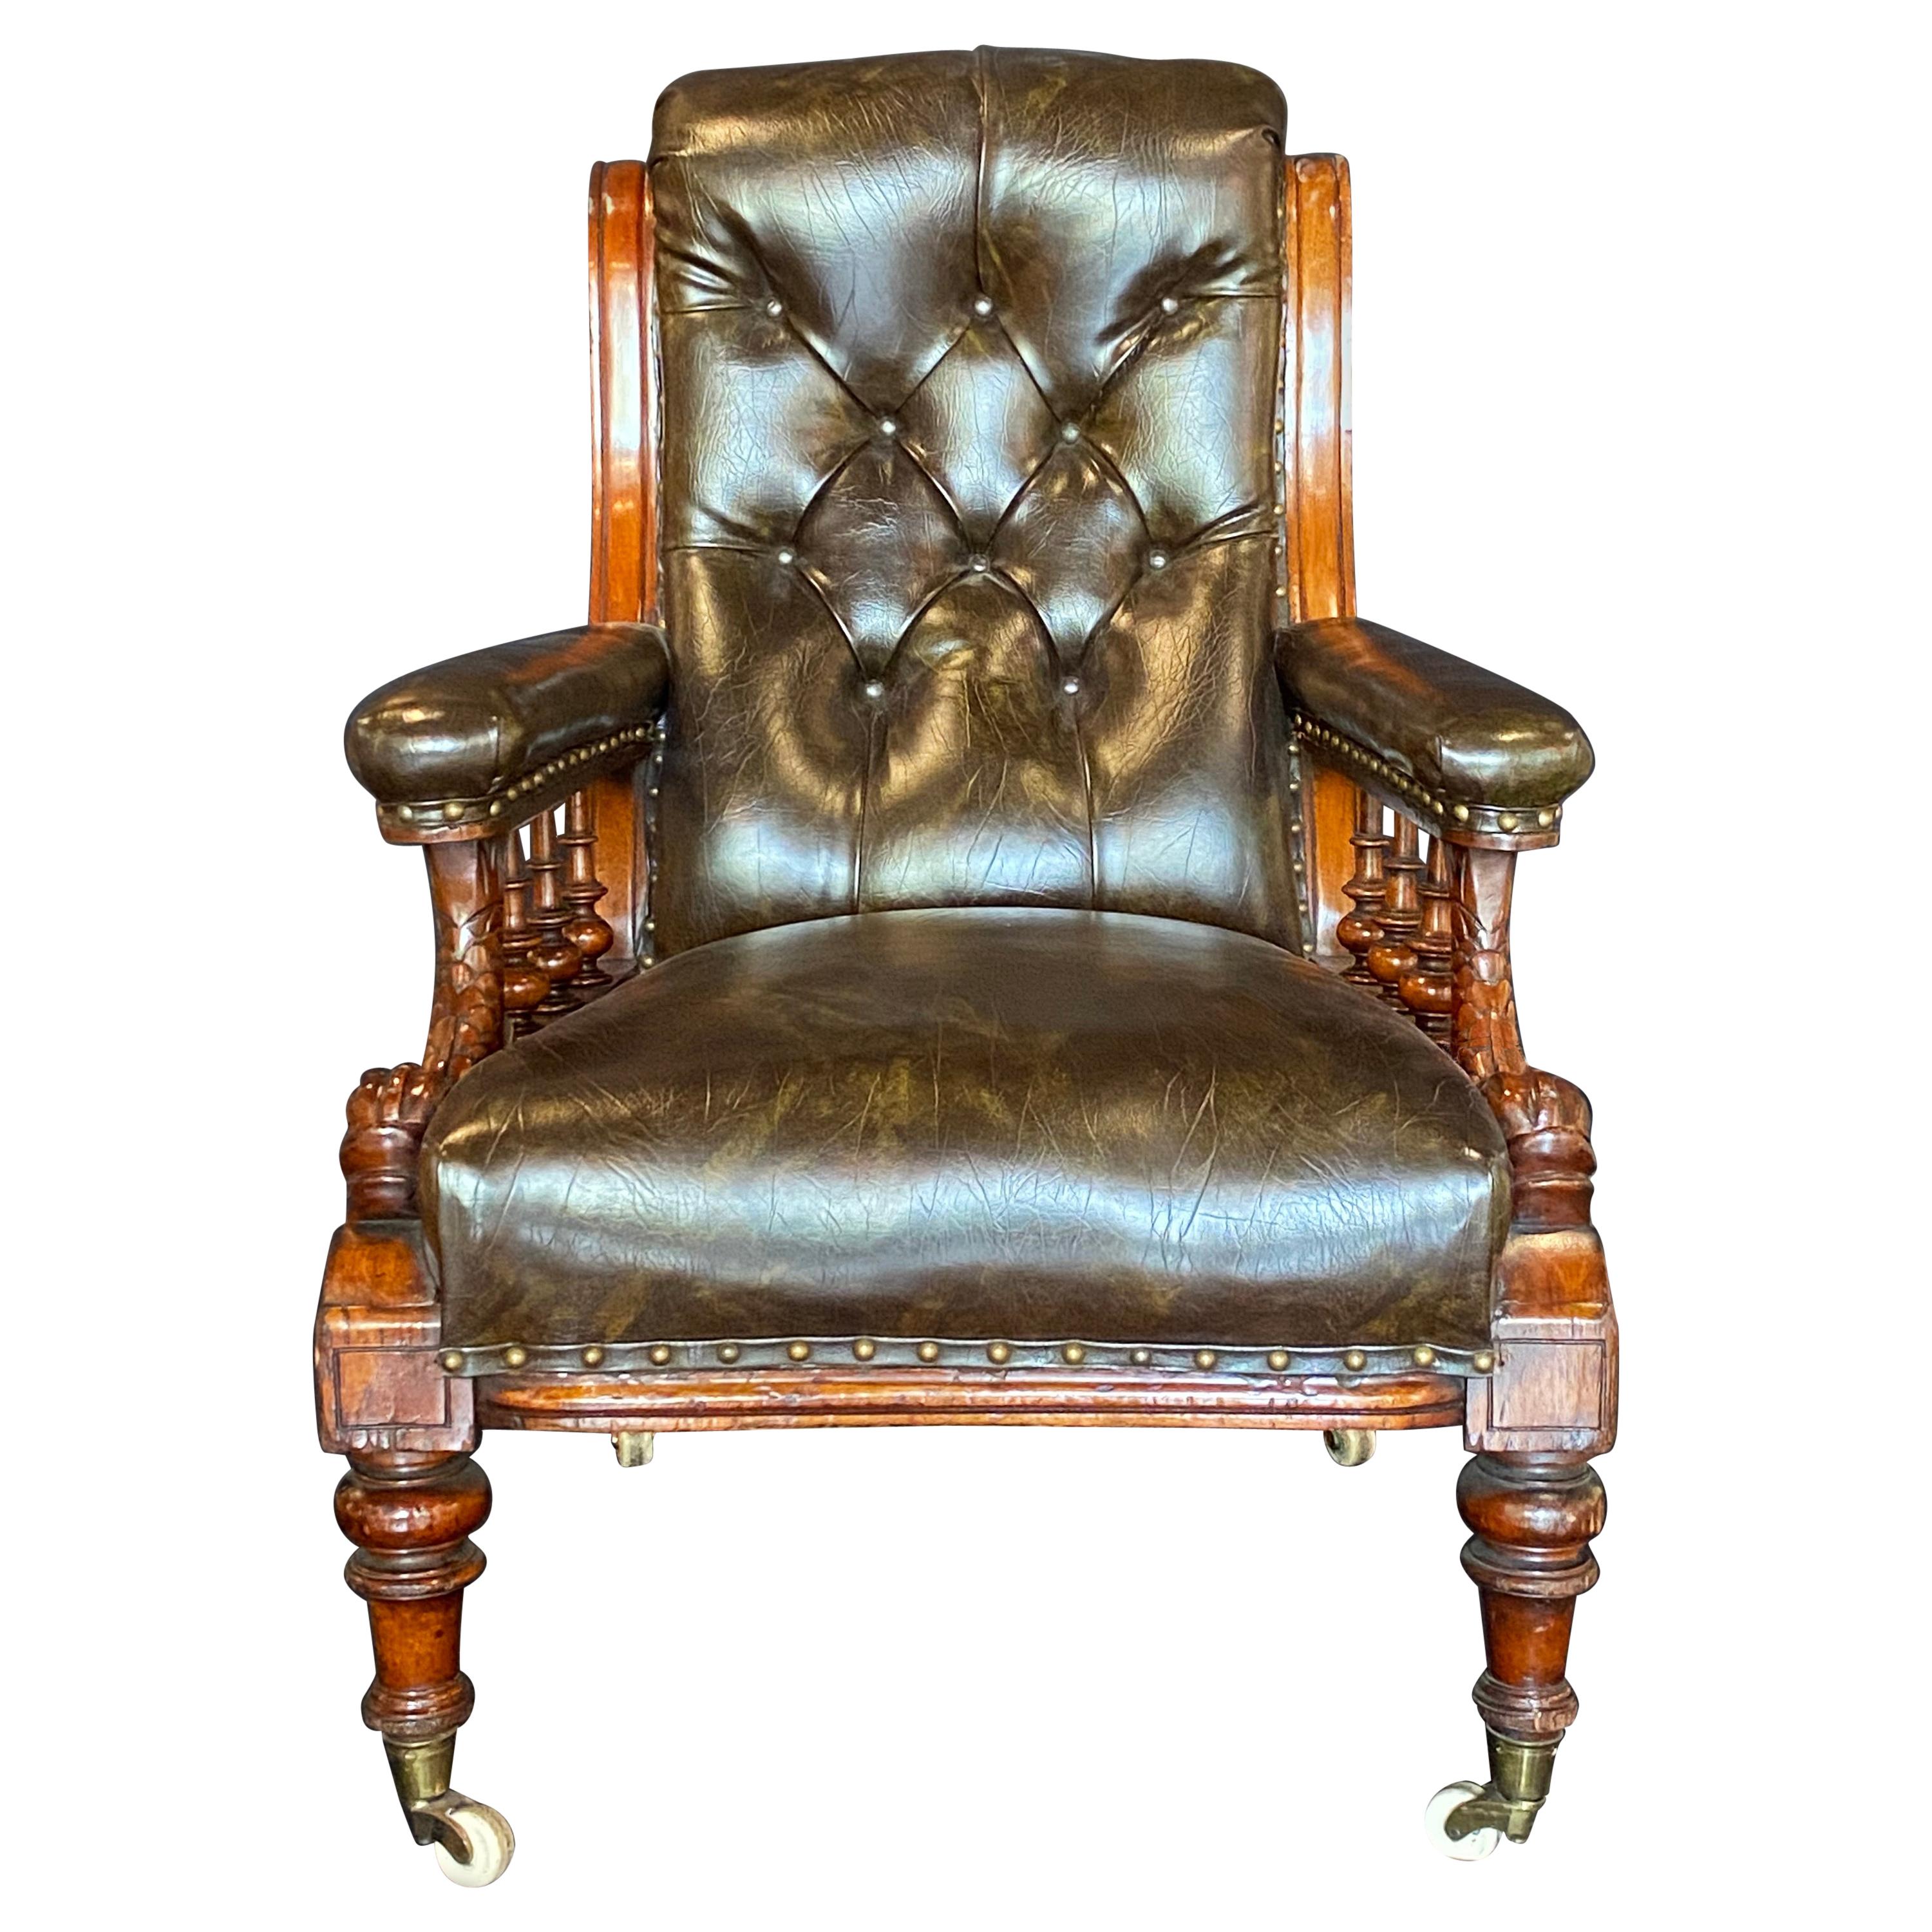 Mid 19th Century Brown Leather Library Chair with Carved Dolphin Arms, Mahogany